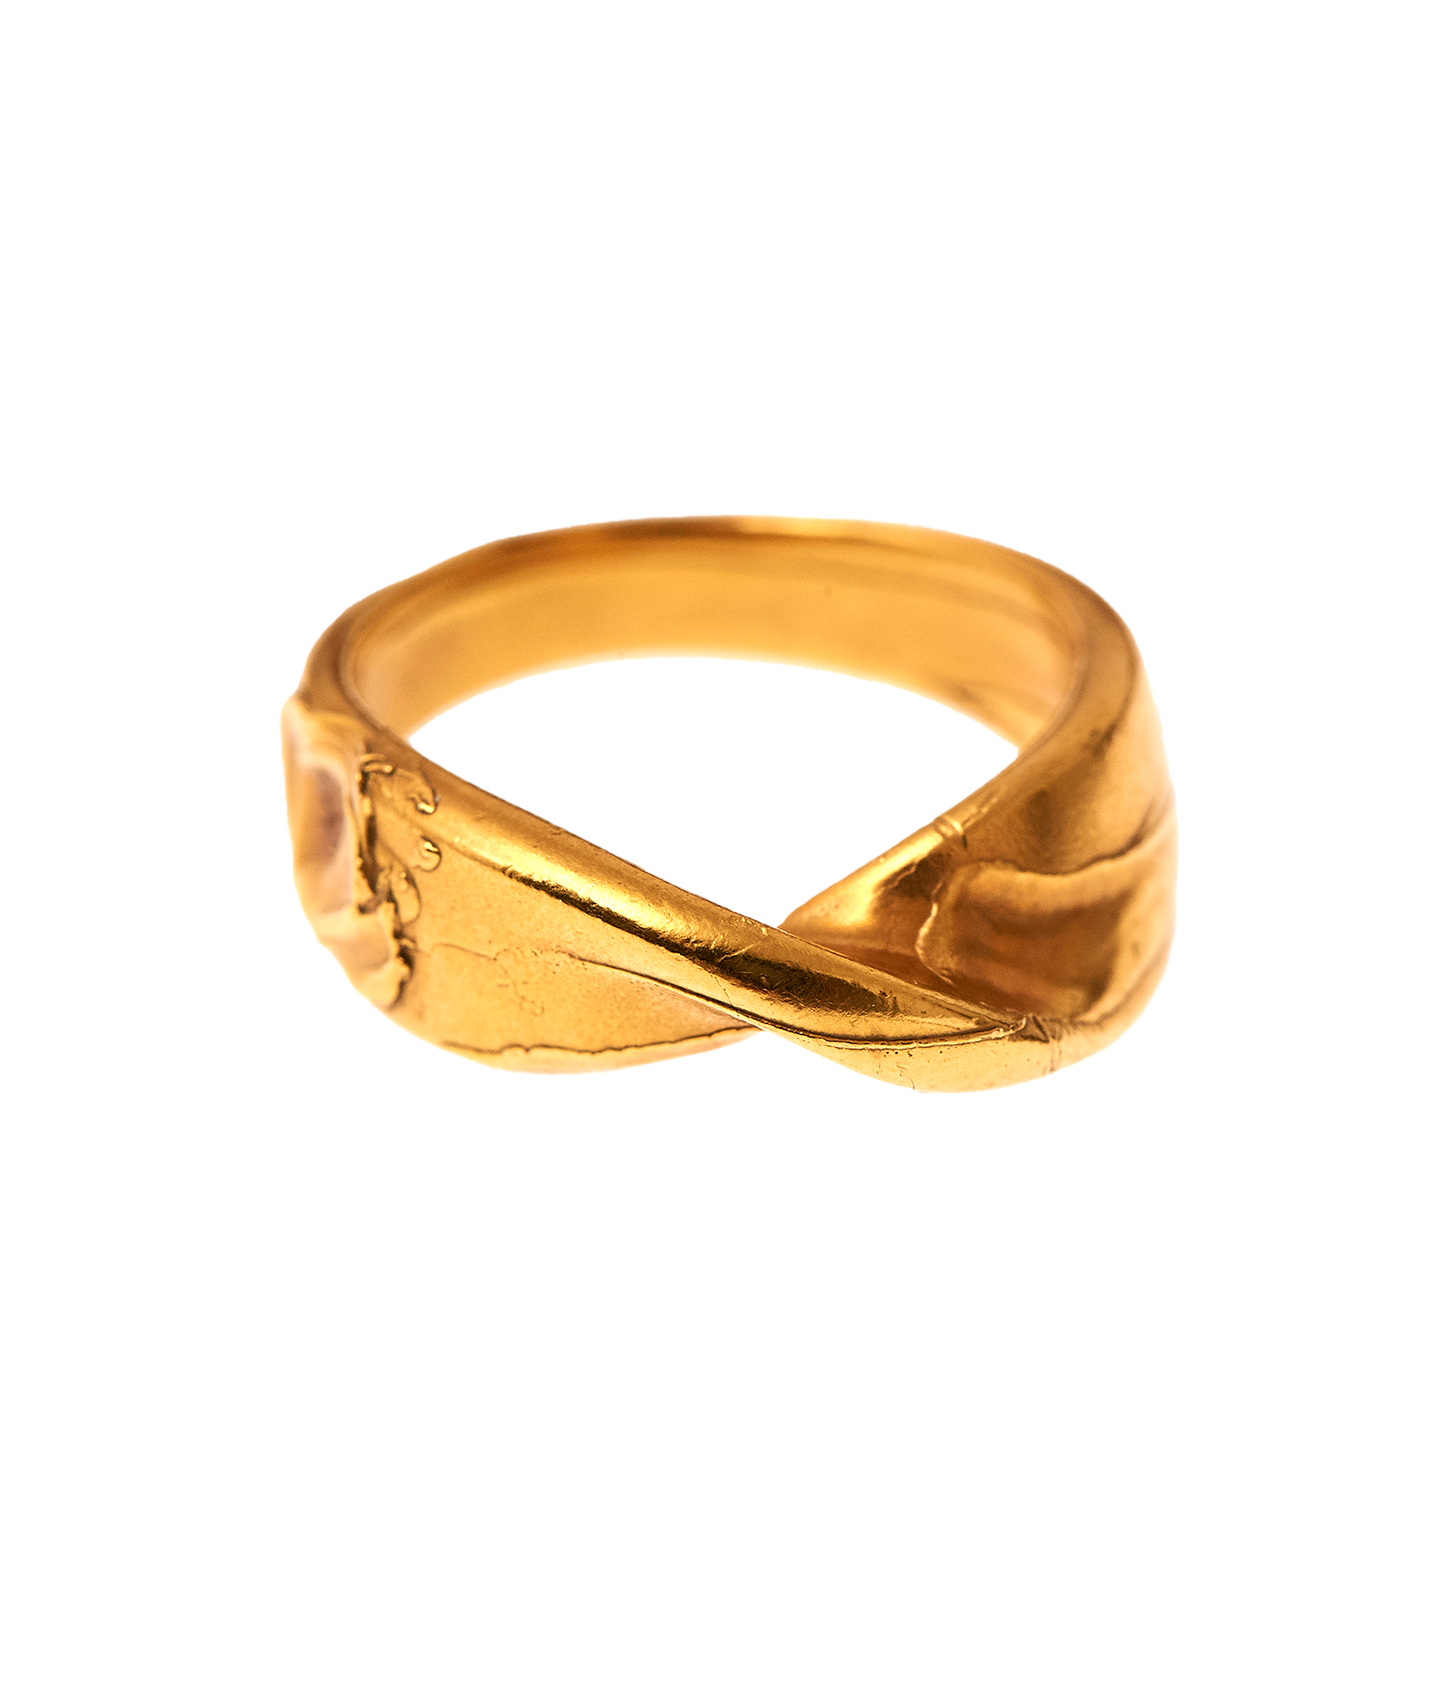 The Reckless Pursuit Ring